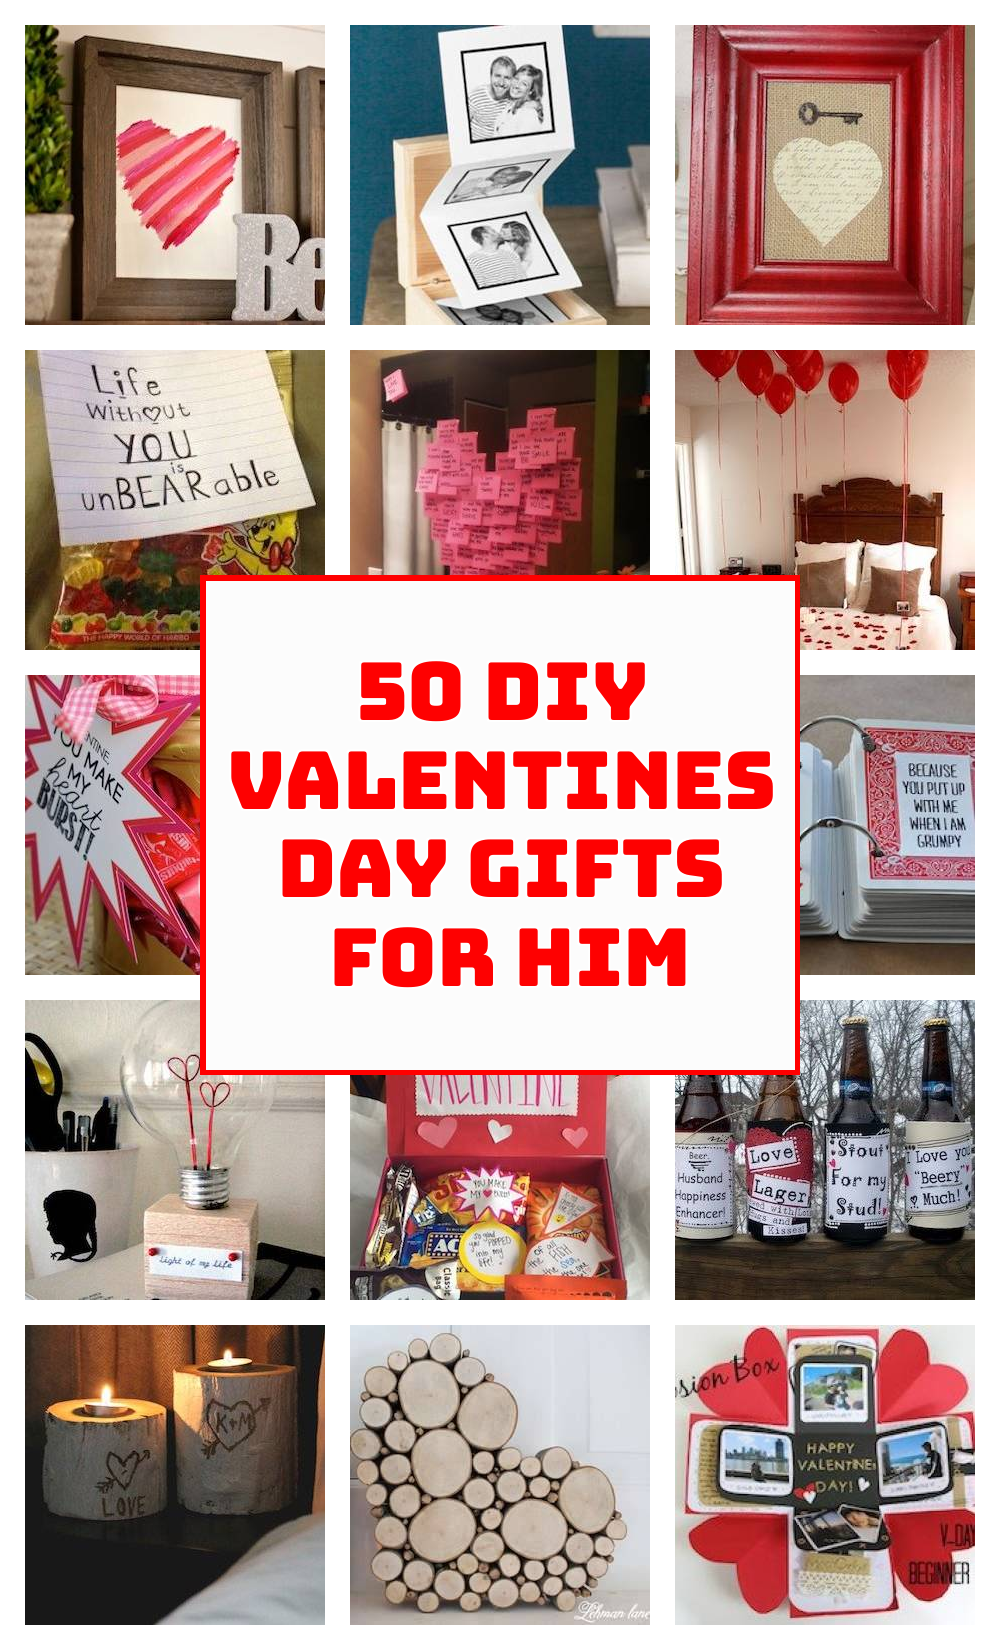 50 DIY Valentines Day Gifts for Him